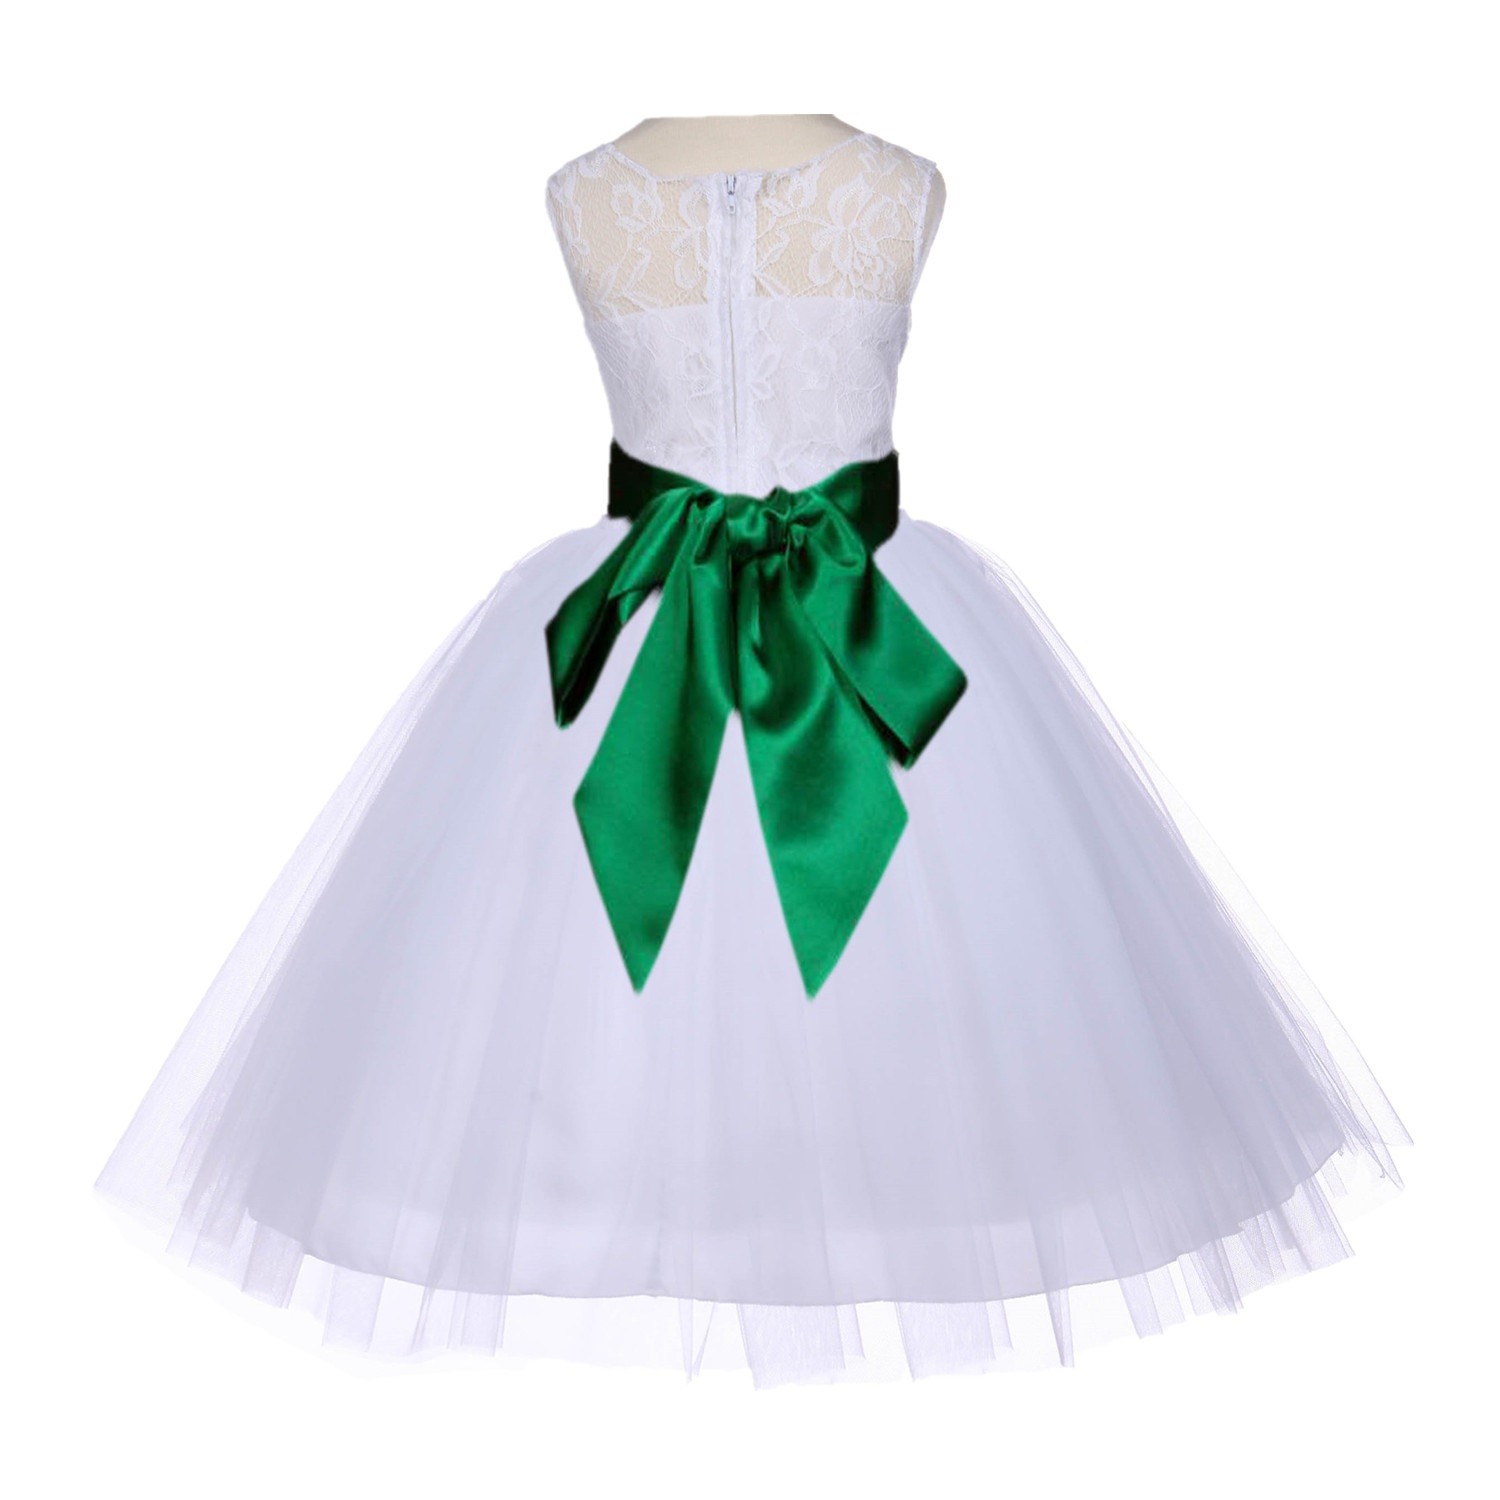 White/Green Floral Lace Bodice Tulle Flower Girl Dress Wedding 153S